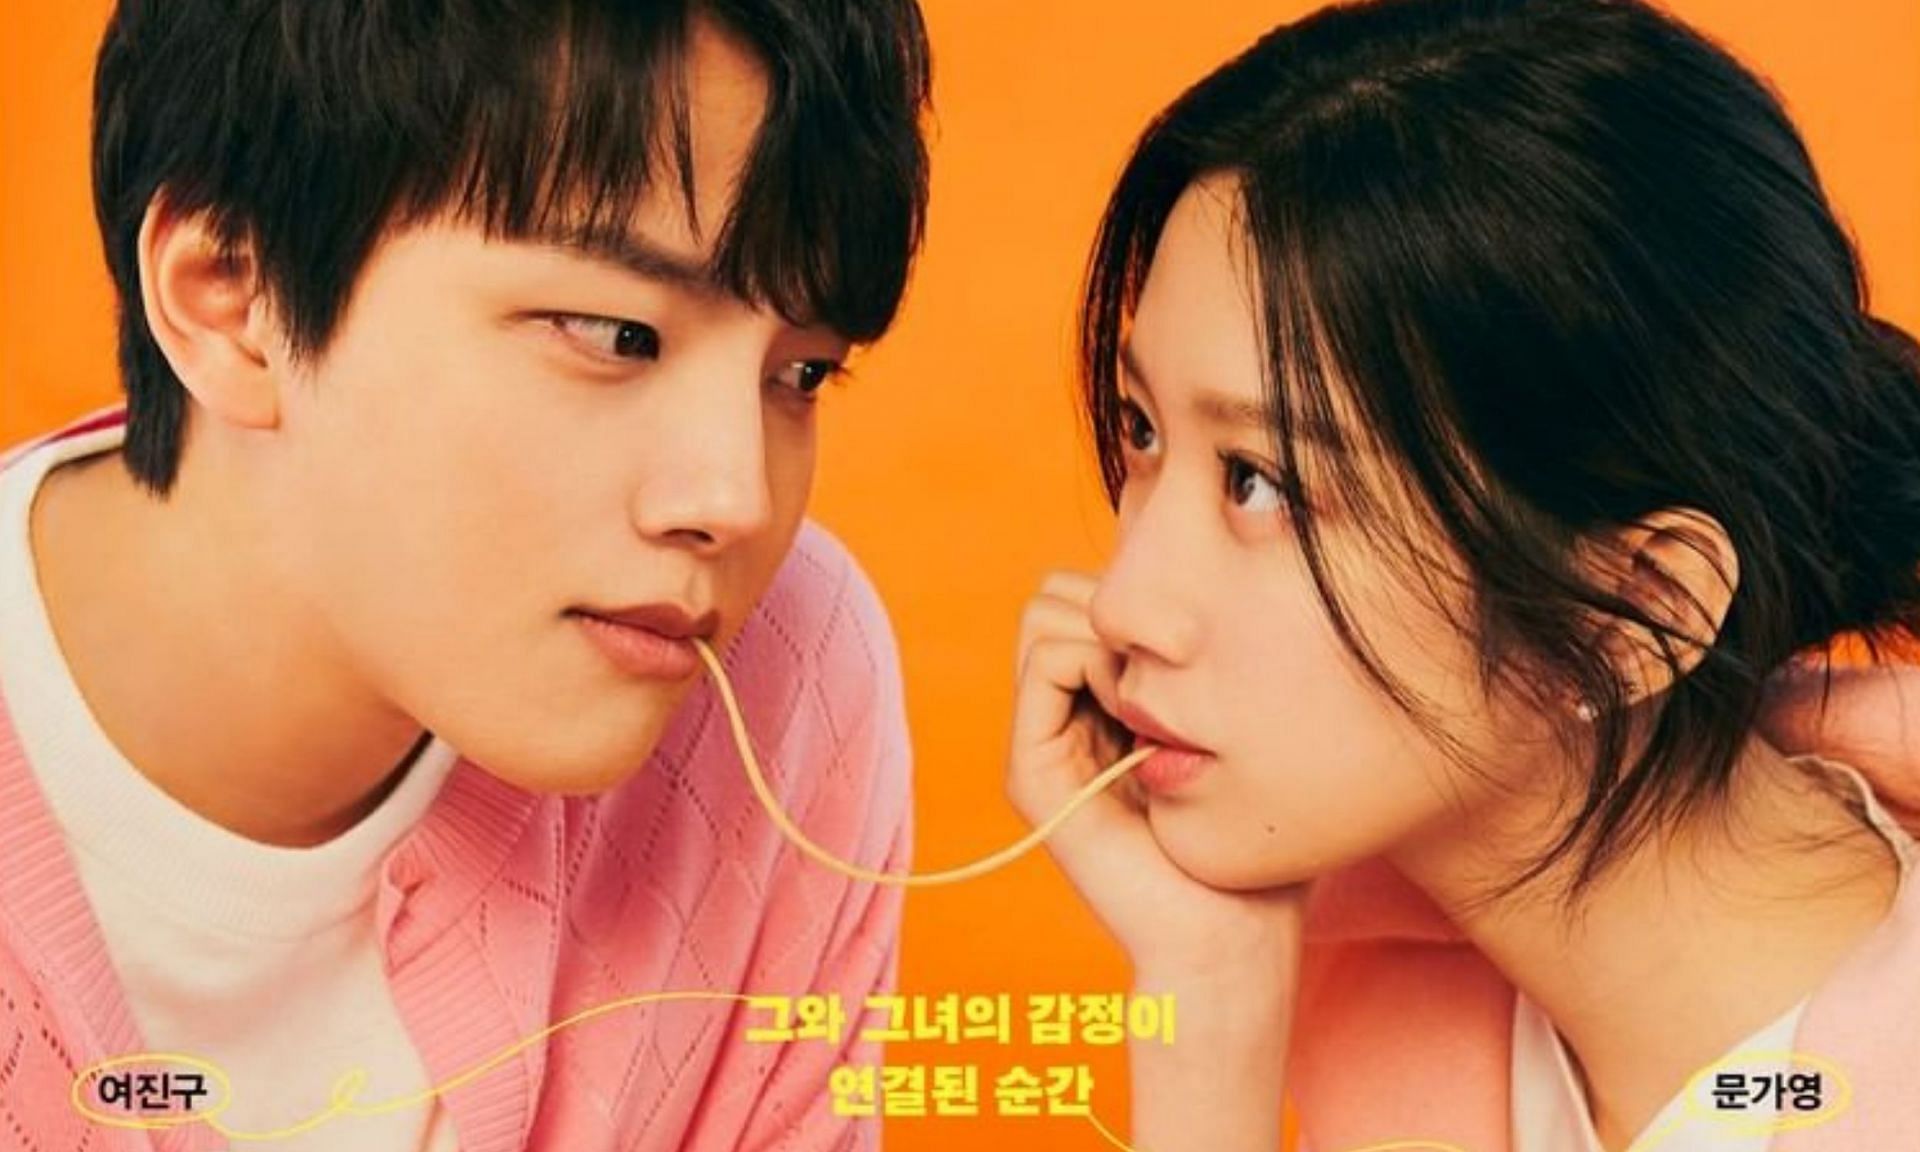 A still of Yeo Jin-goo and Moon Ga-young (Image via tvn_drama/Instagram)